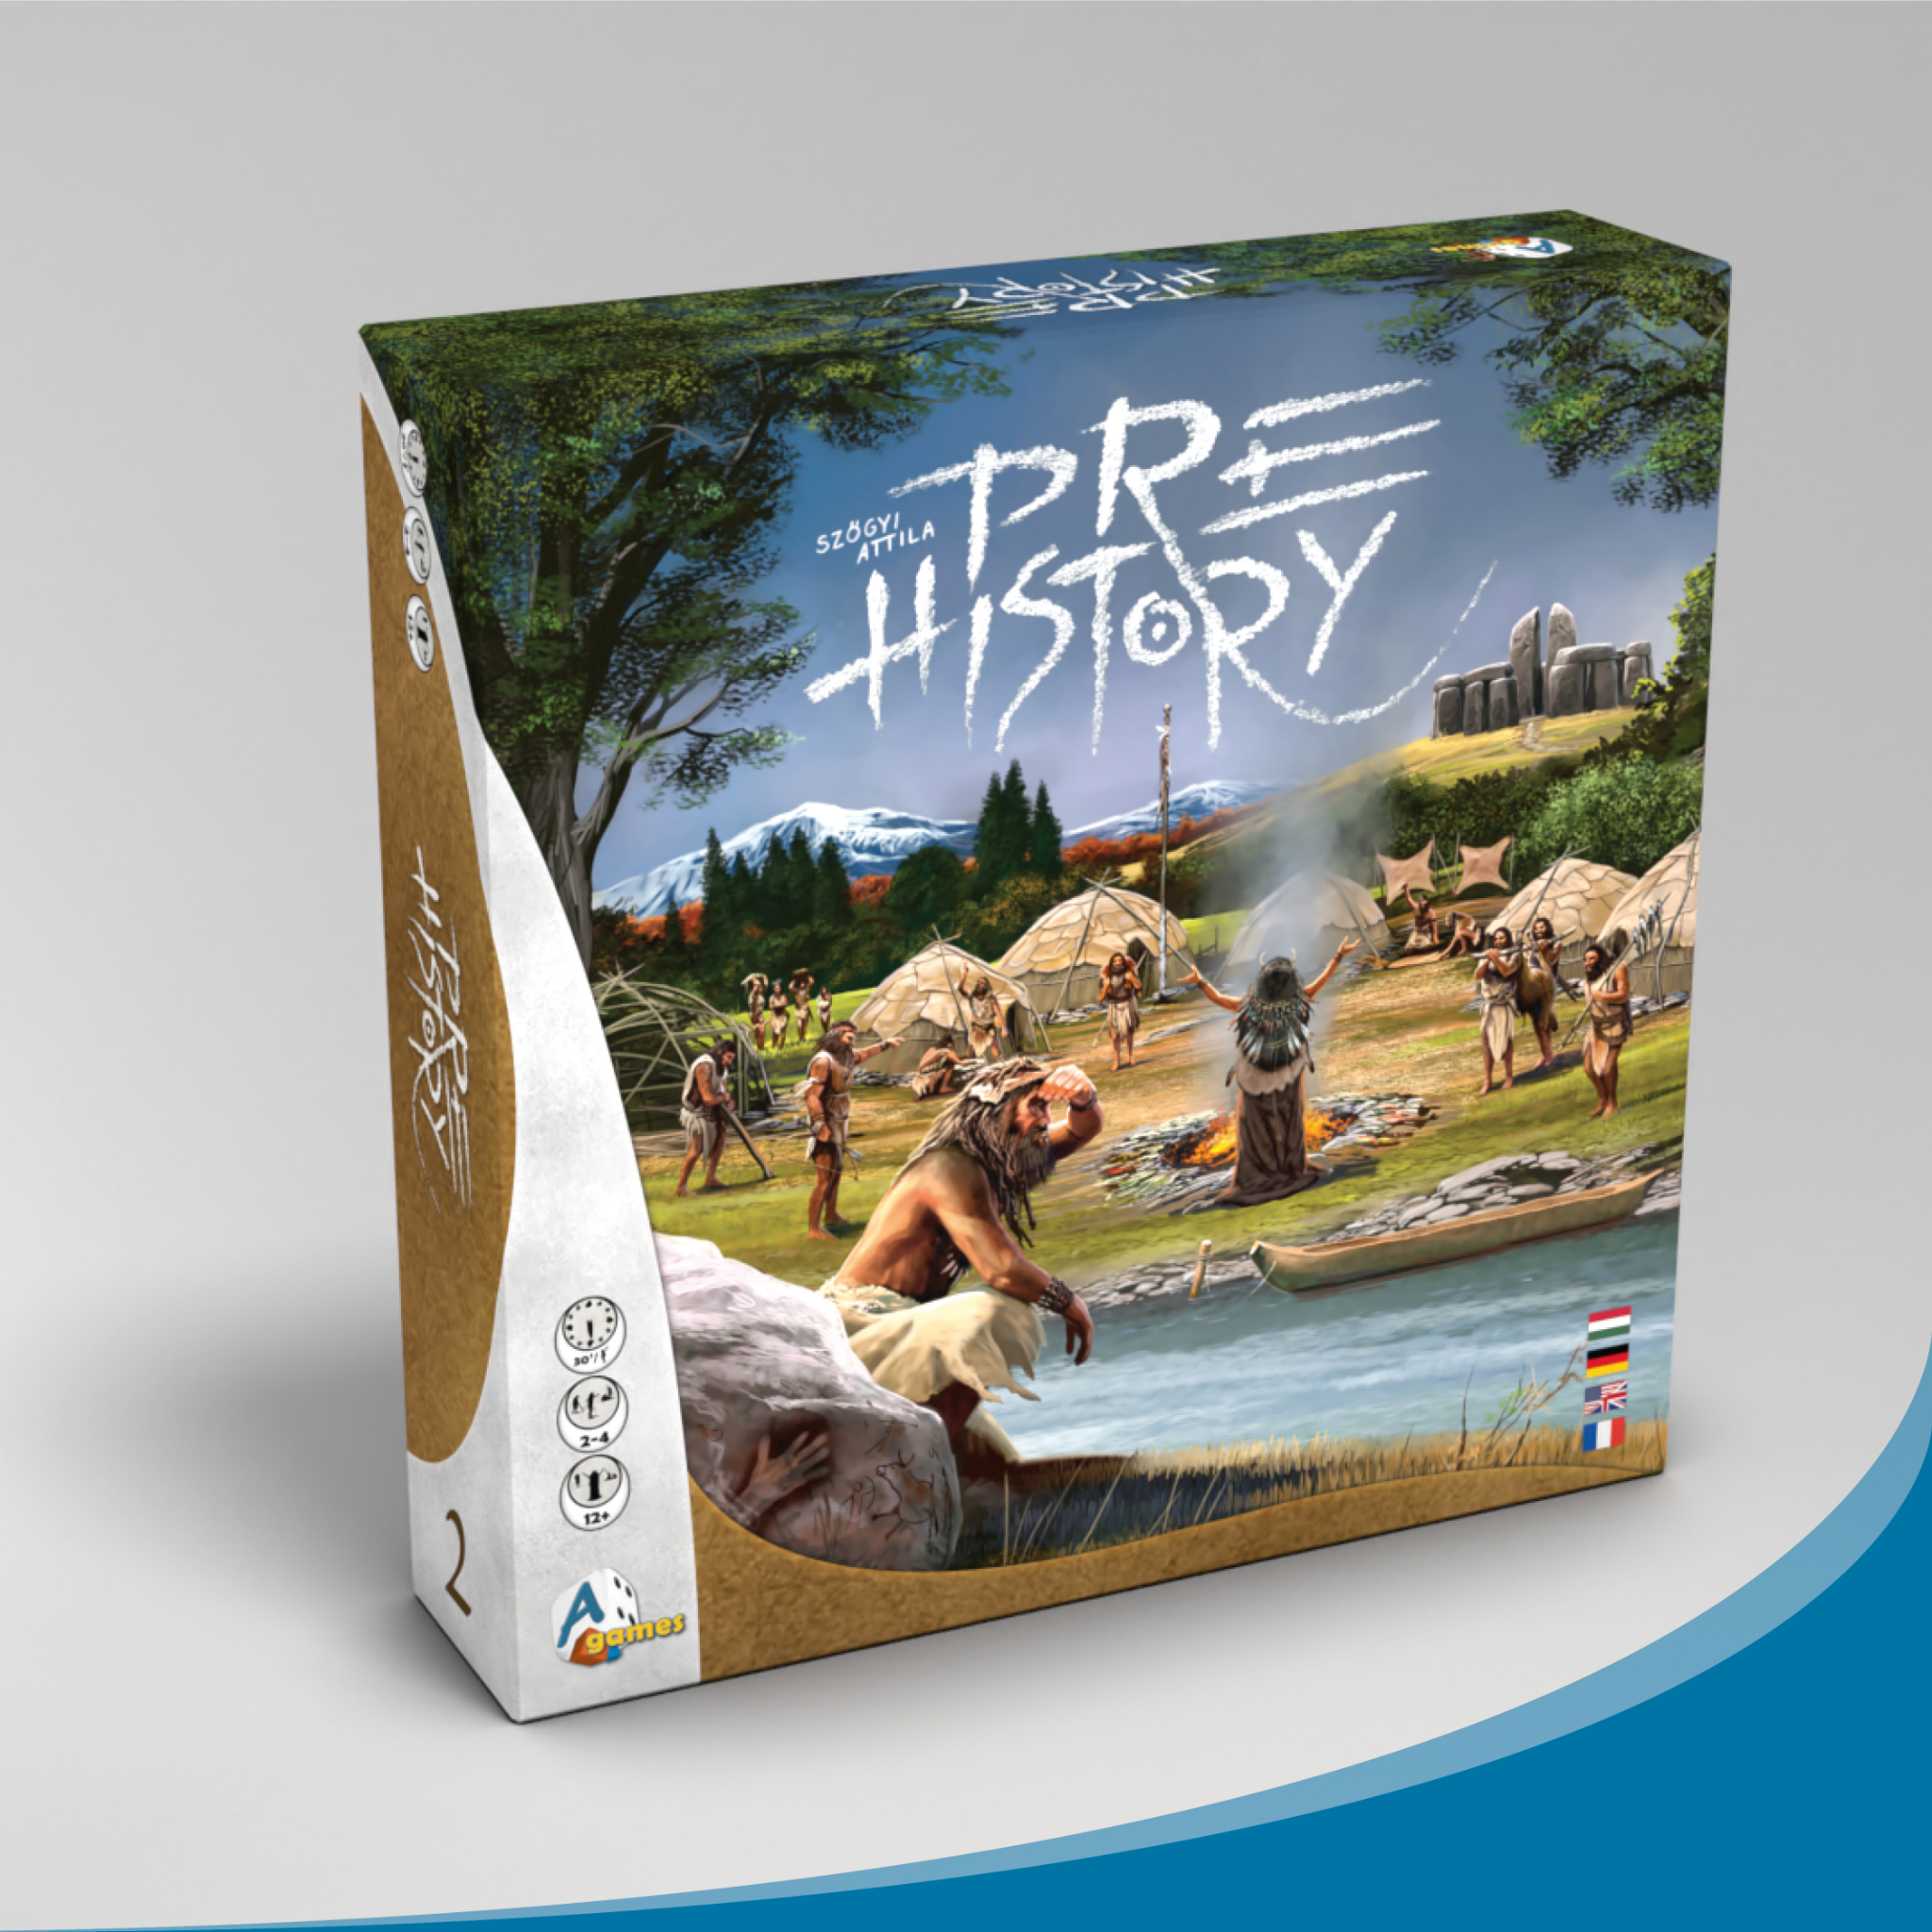  The History of Prehistory: An Adventure Through 4